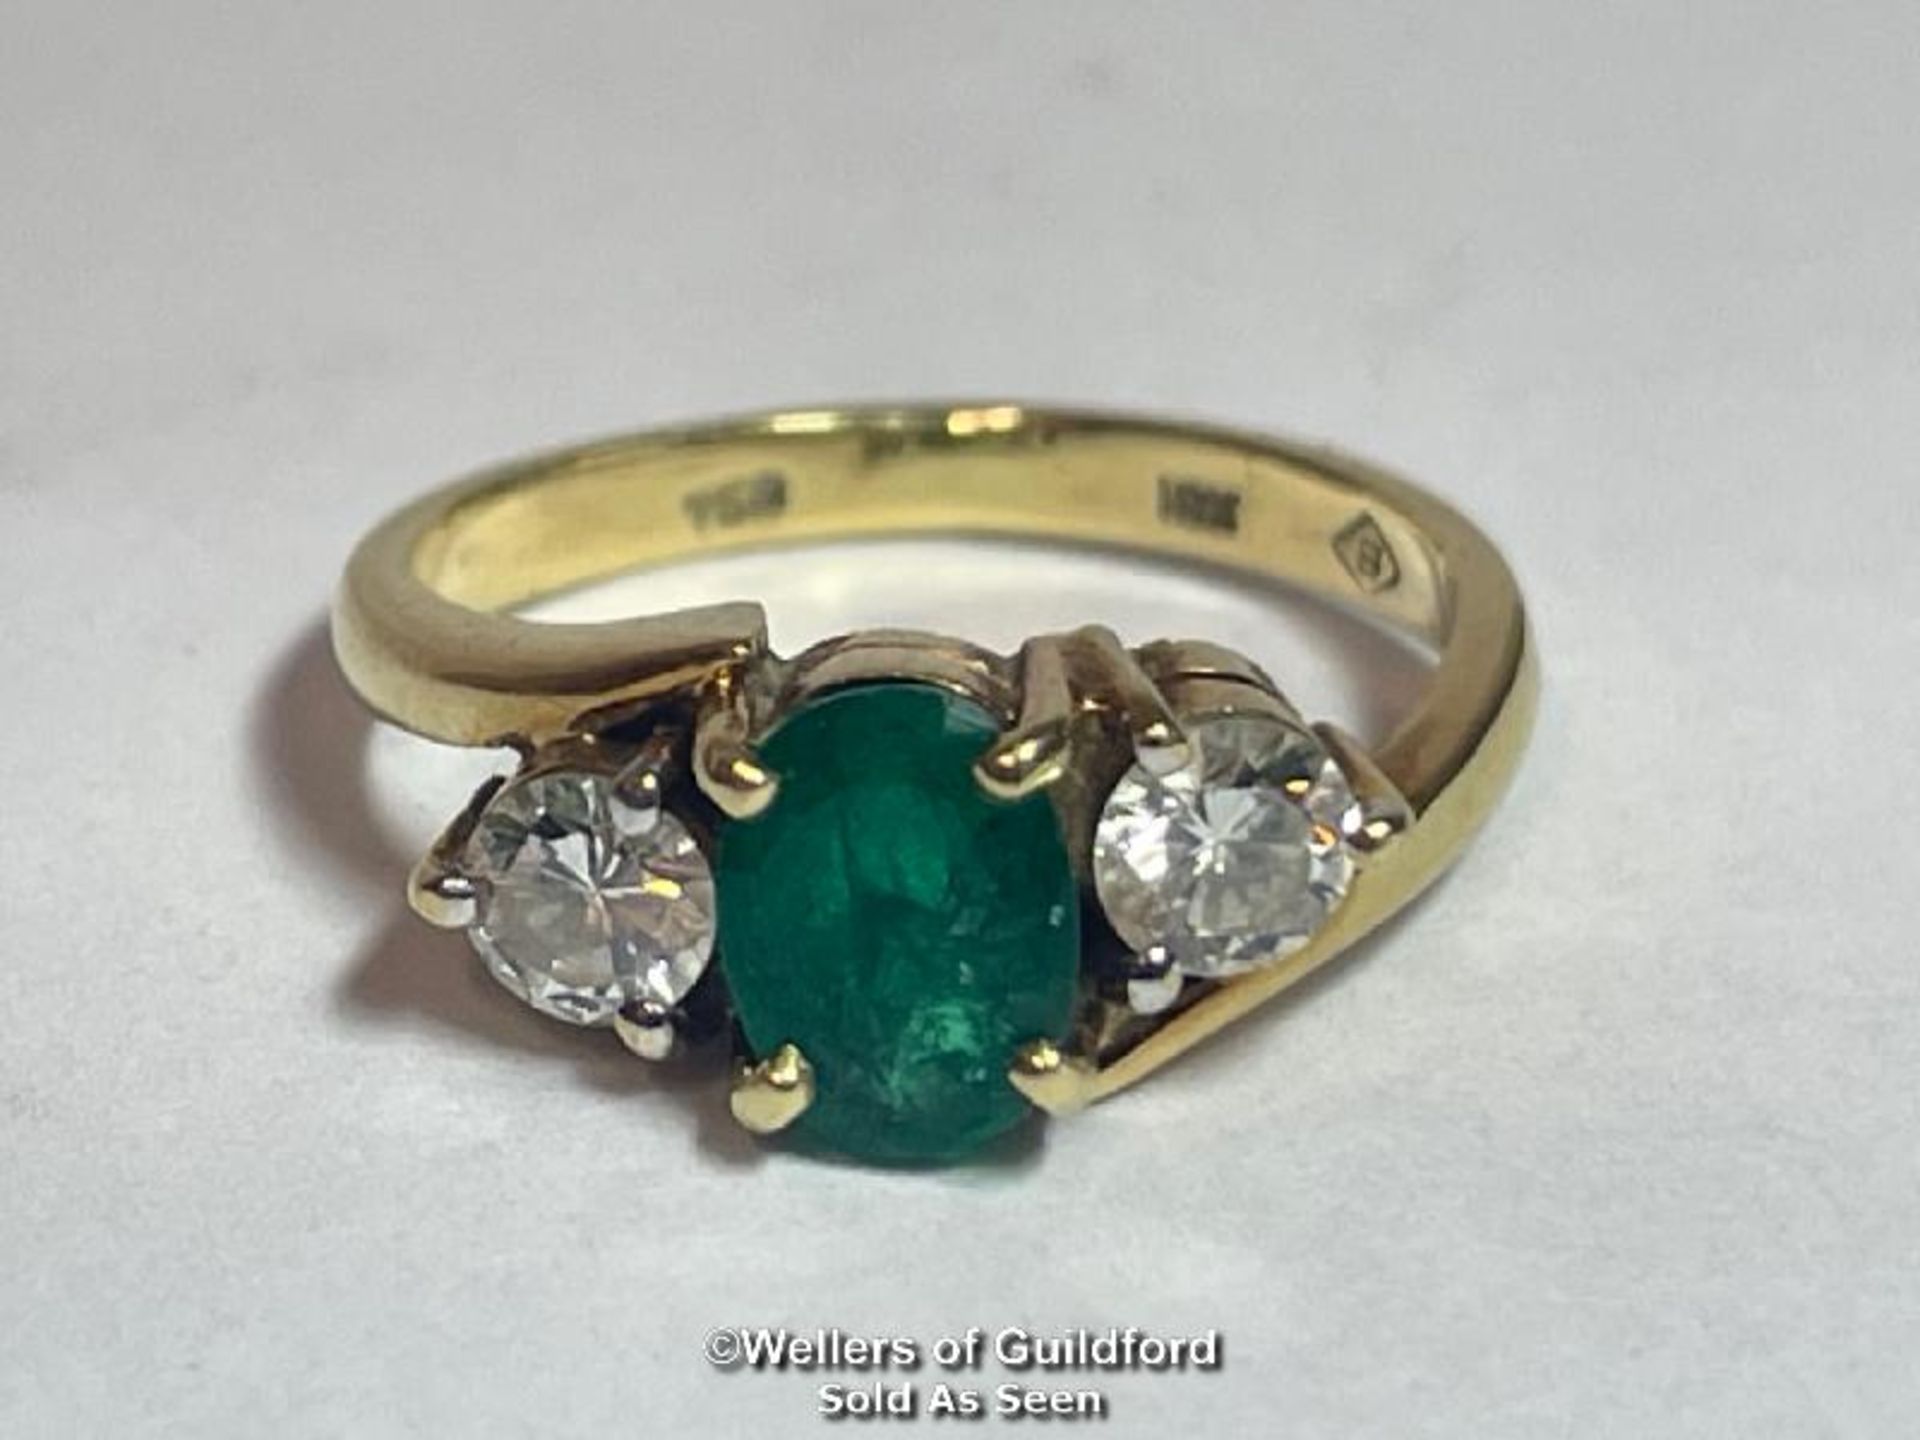 An emerald and diamond three stone ring in crossover style. Emerald measures approx 6.9 x 5.1 x 3.